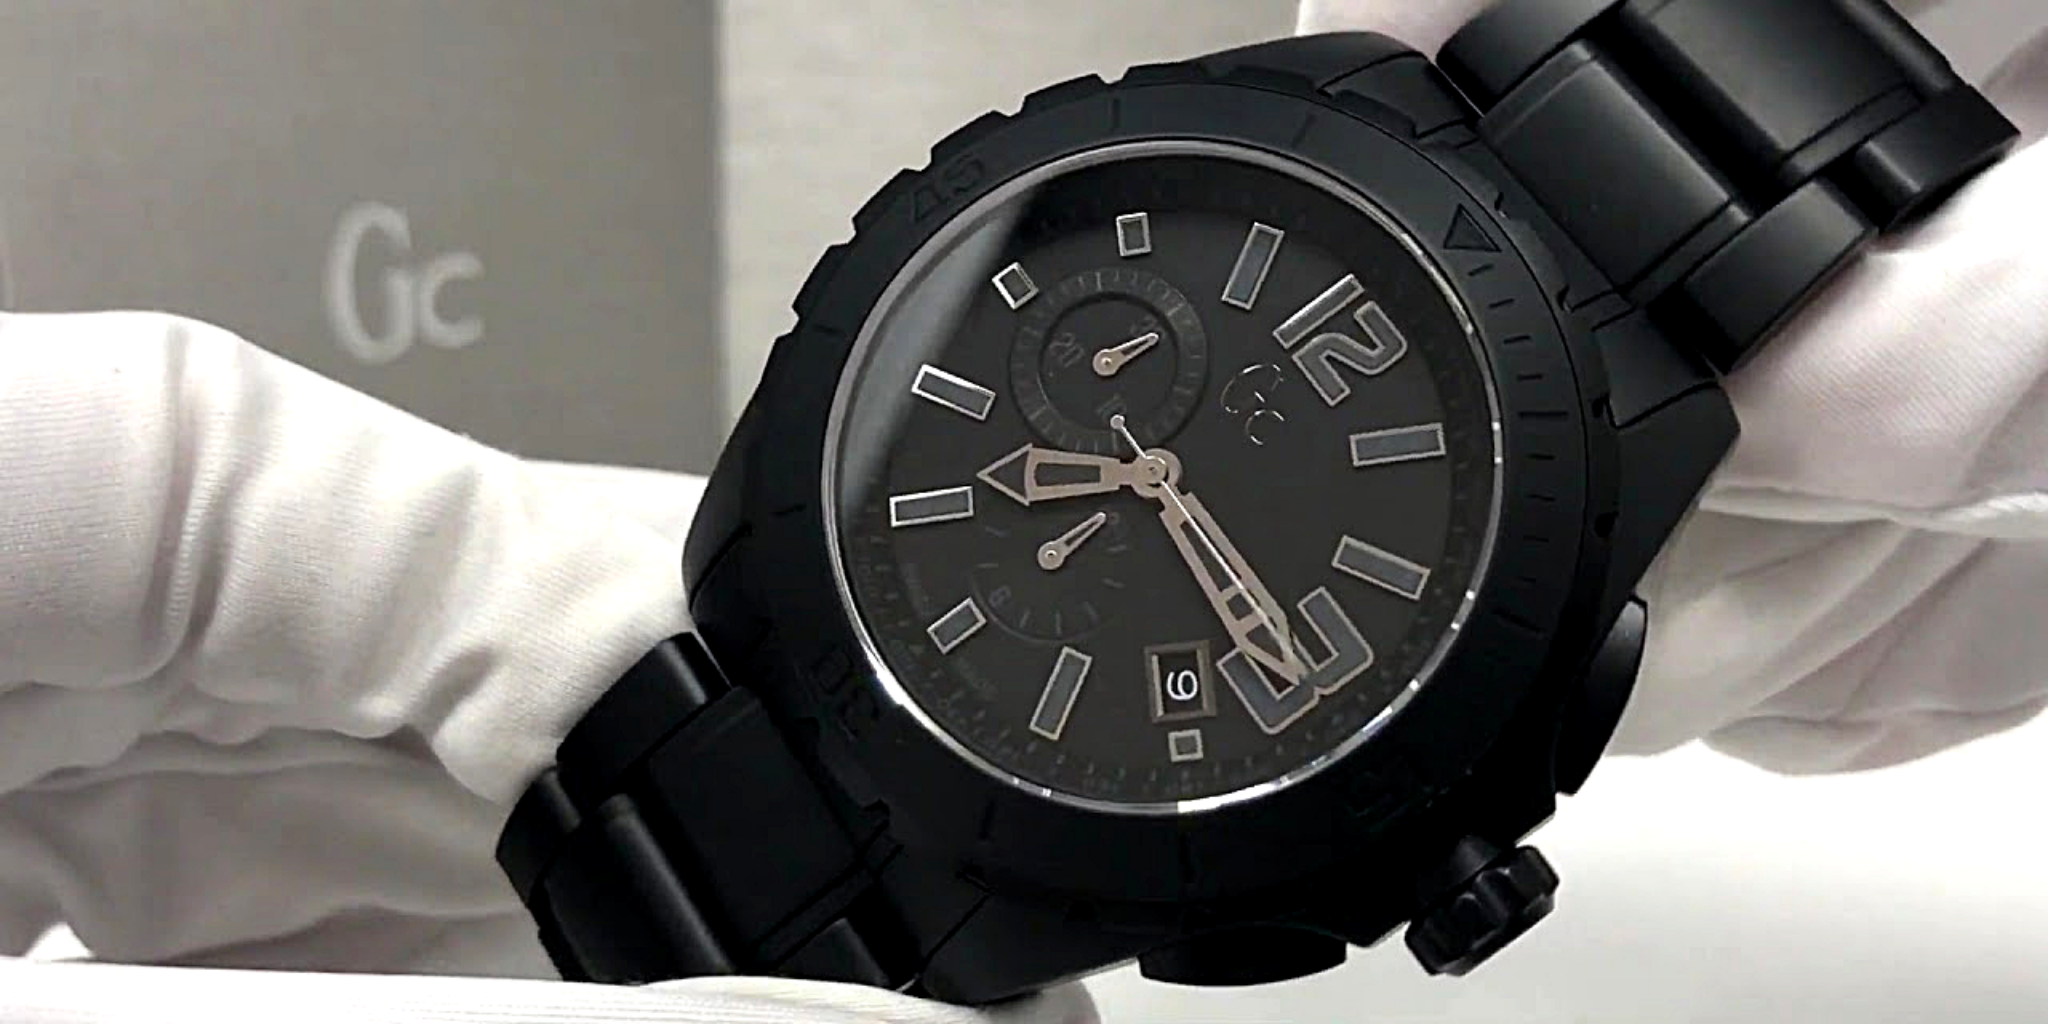 køre Disse race Shop Top 10 Guess Luxury Watches Worth Investing In - Watches & Crystals